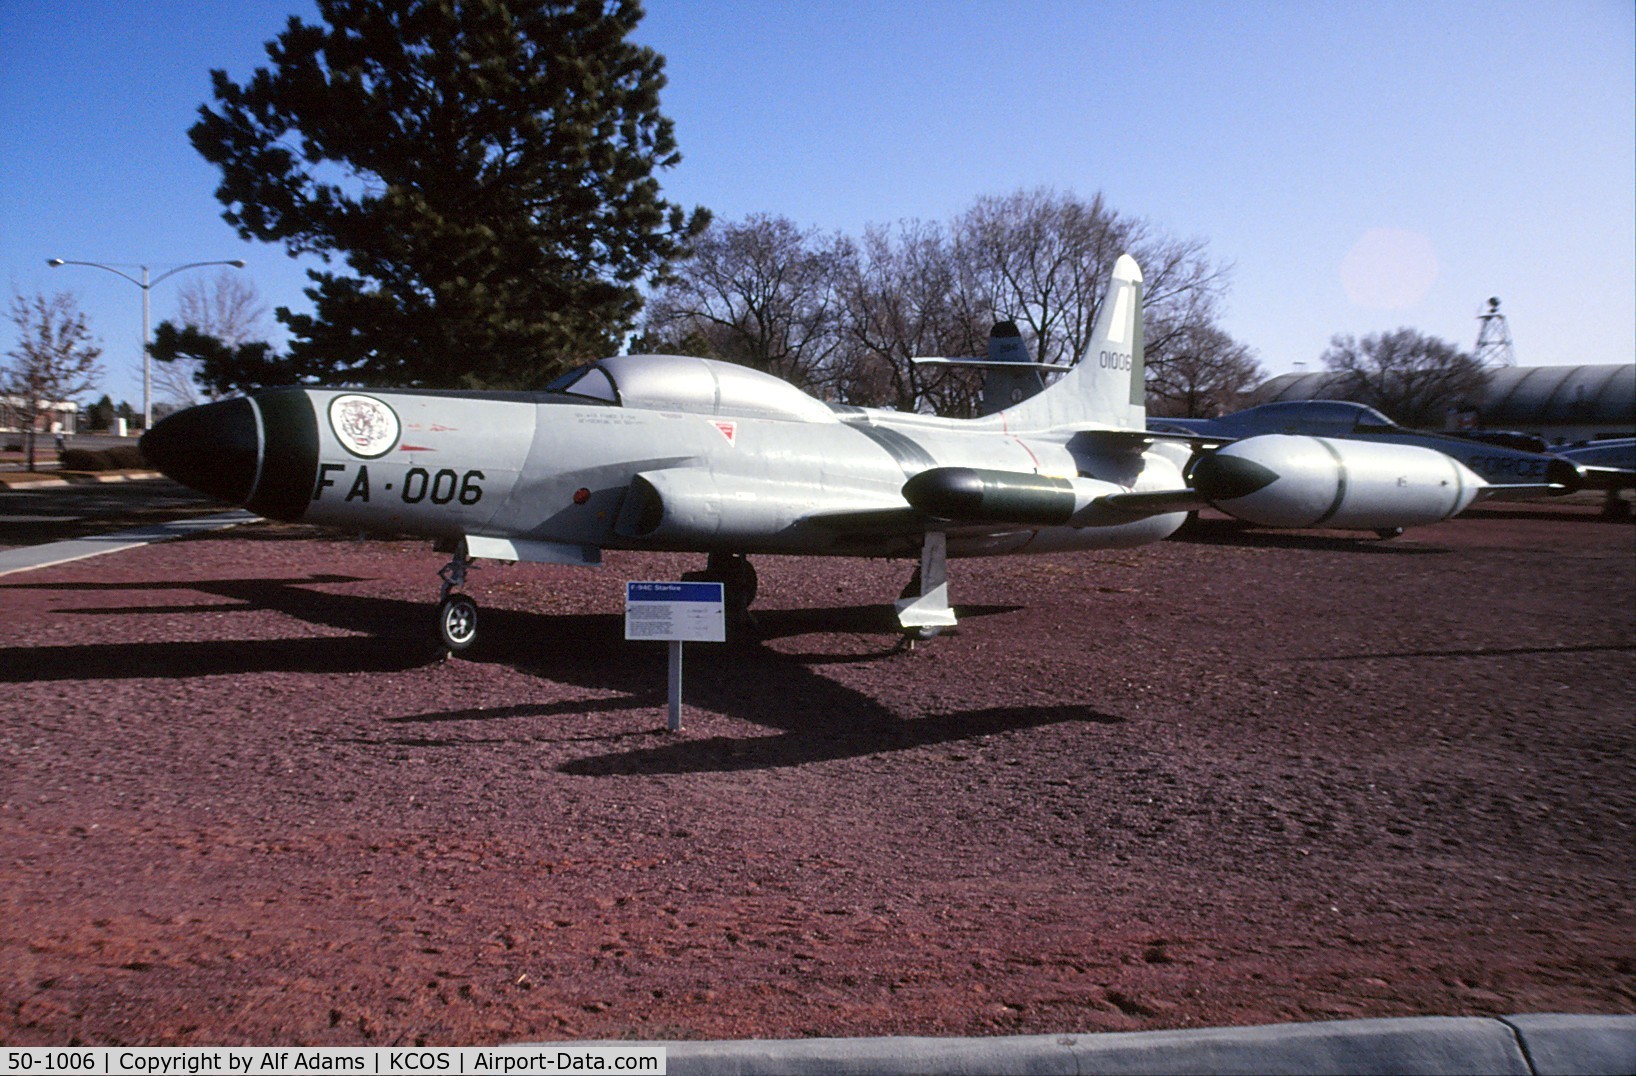 50-1006, 1950 Lockheed F-94C Starfire C/N 880-8051, Shown at the museum on Peterson Air Force Base, Colorado Springs, Colorado in 1992.